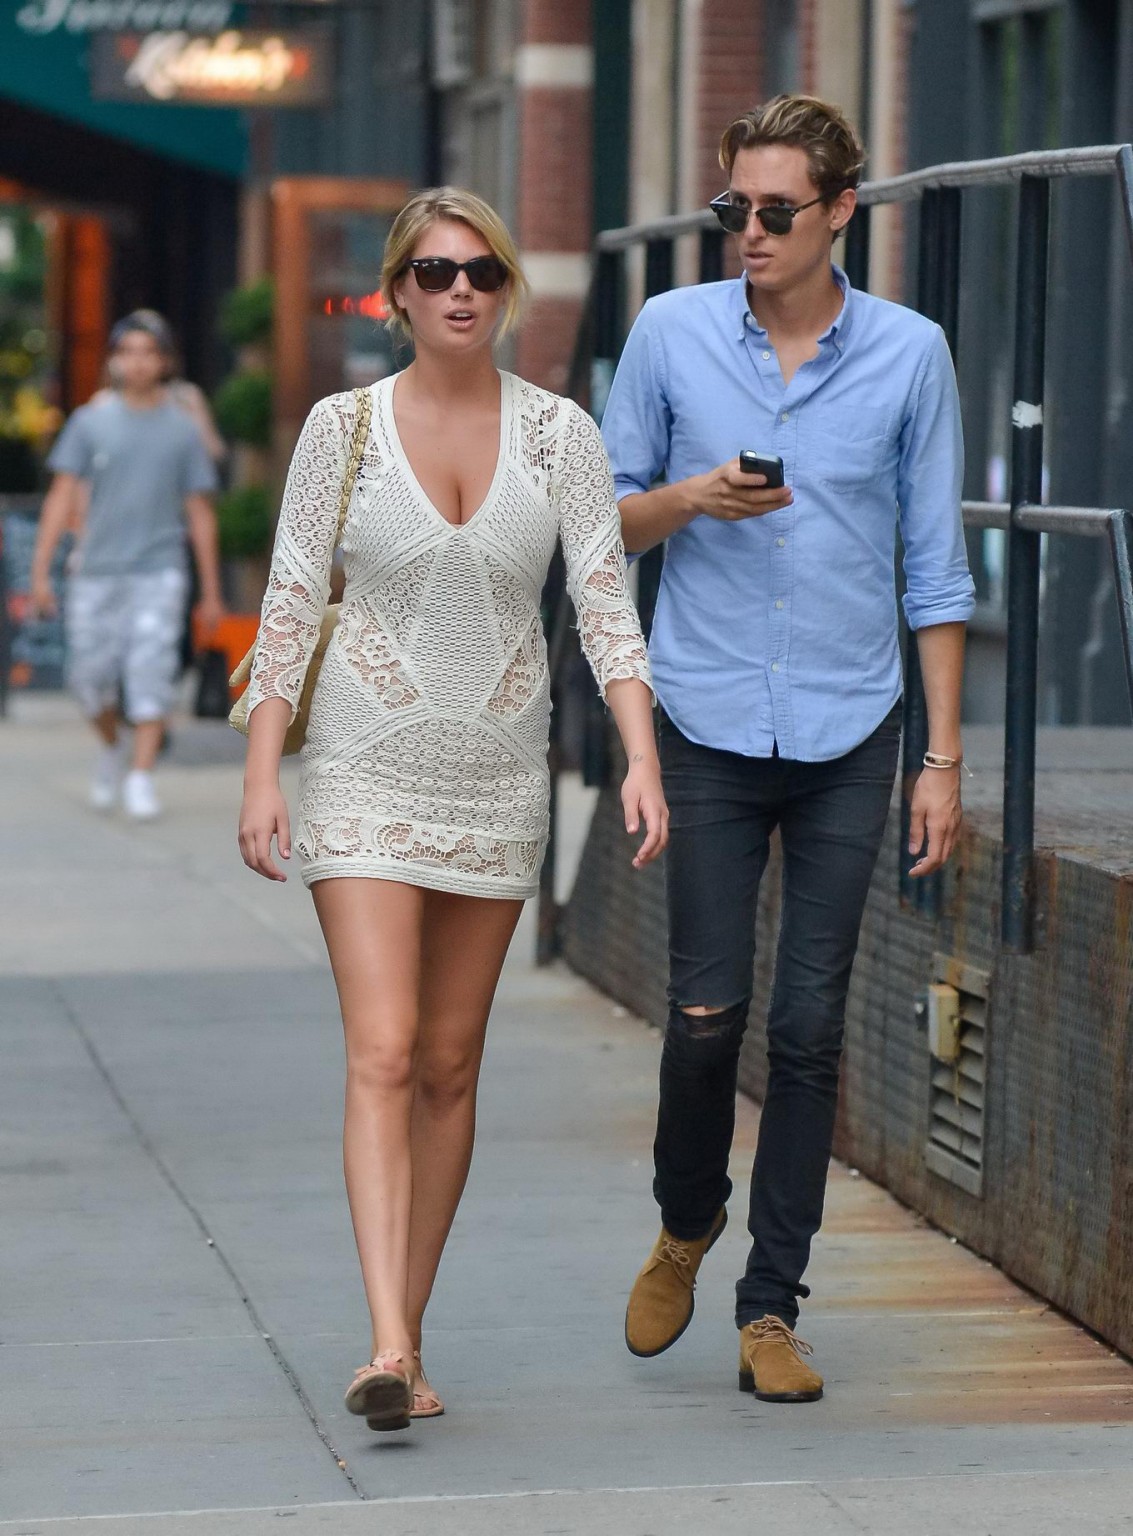 Kate upton leggy cleavy wearing a lace mini dress out in nyc
 #75224783